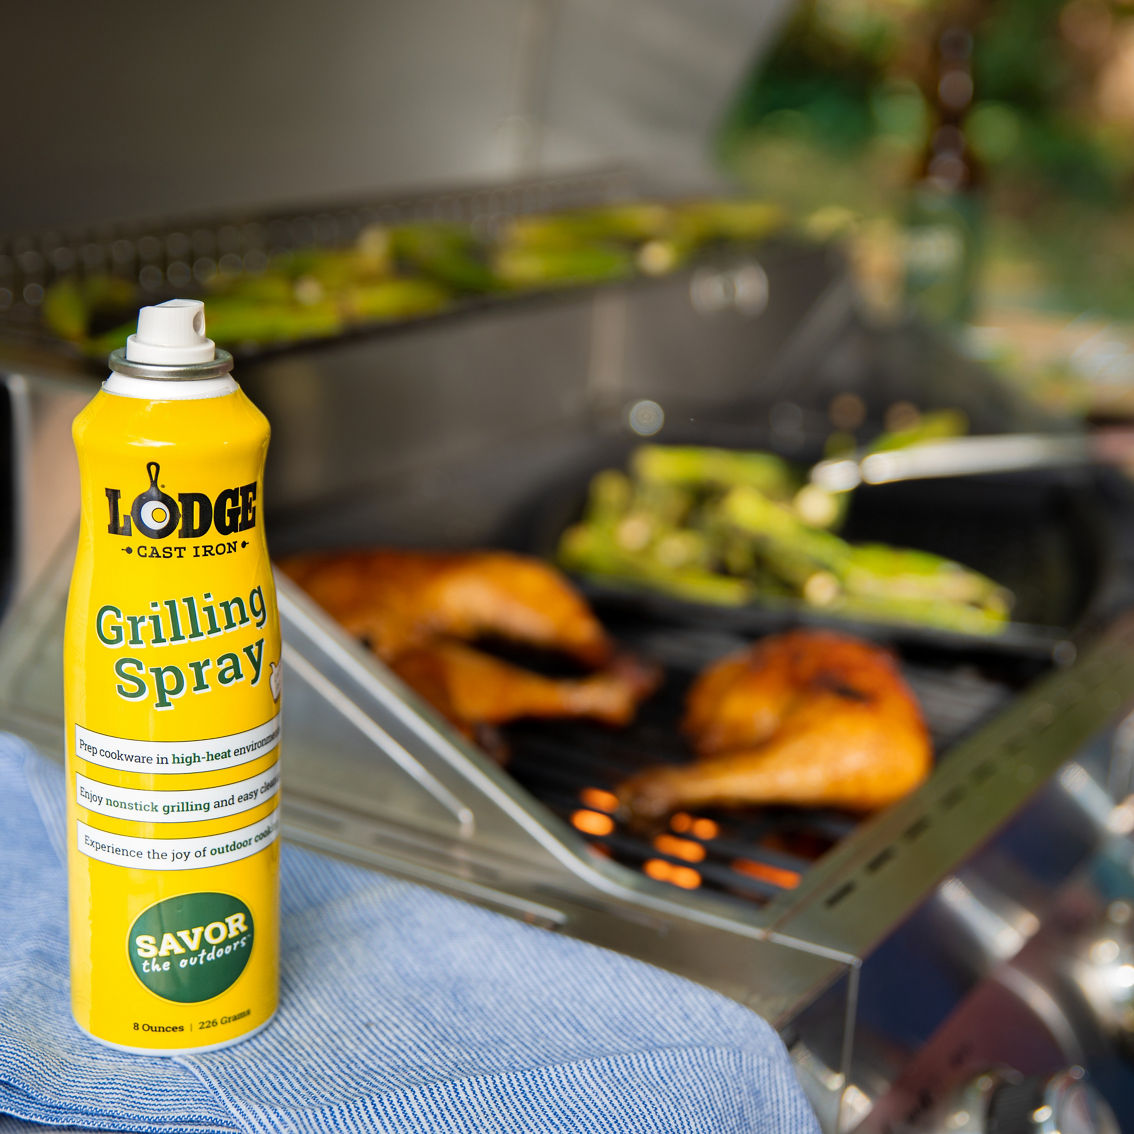 Lodge Grilling Spray - Image 2 of 4